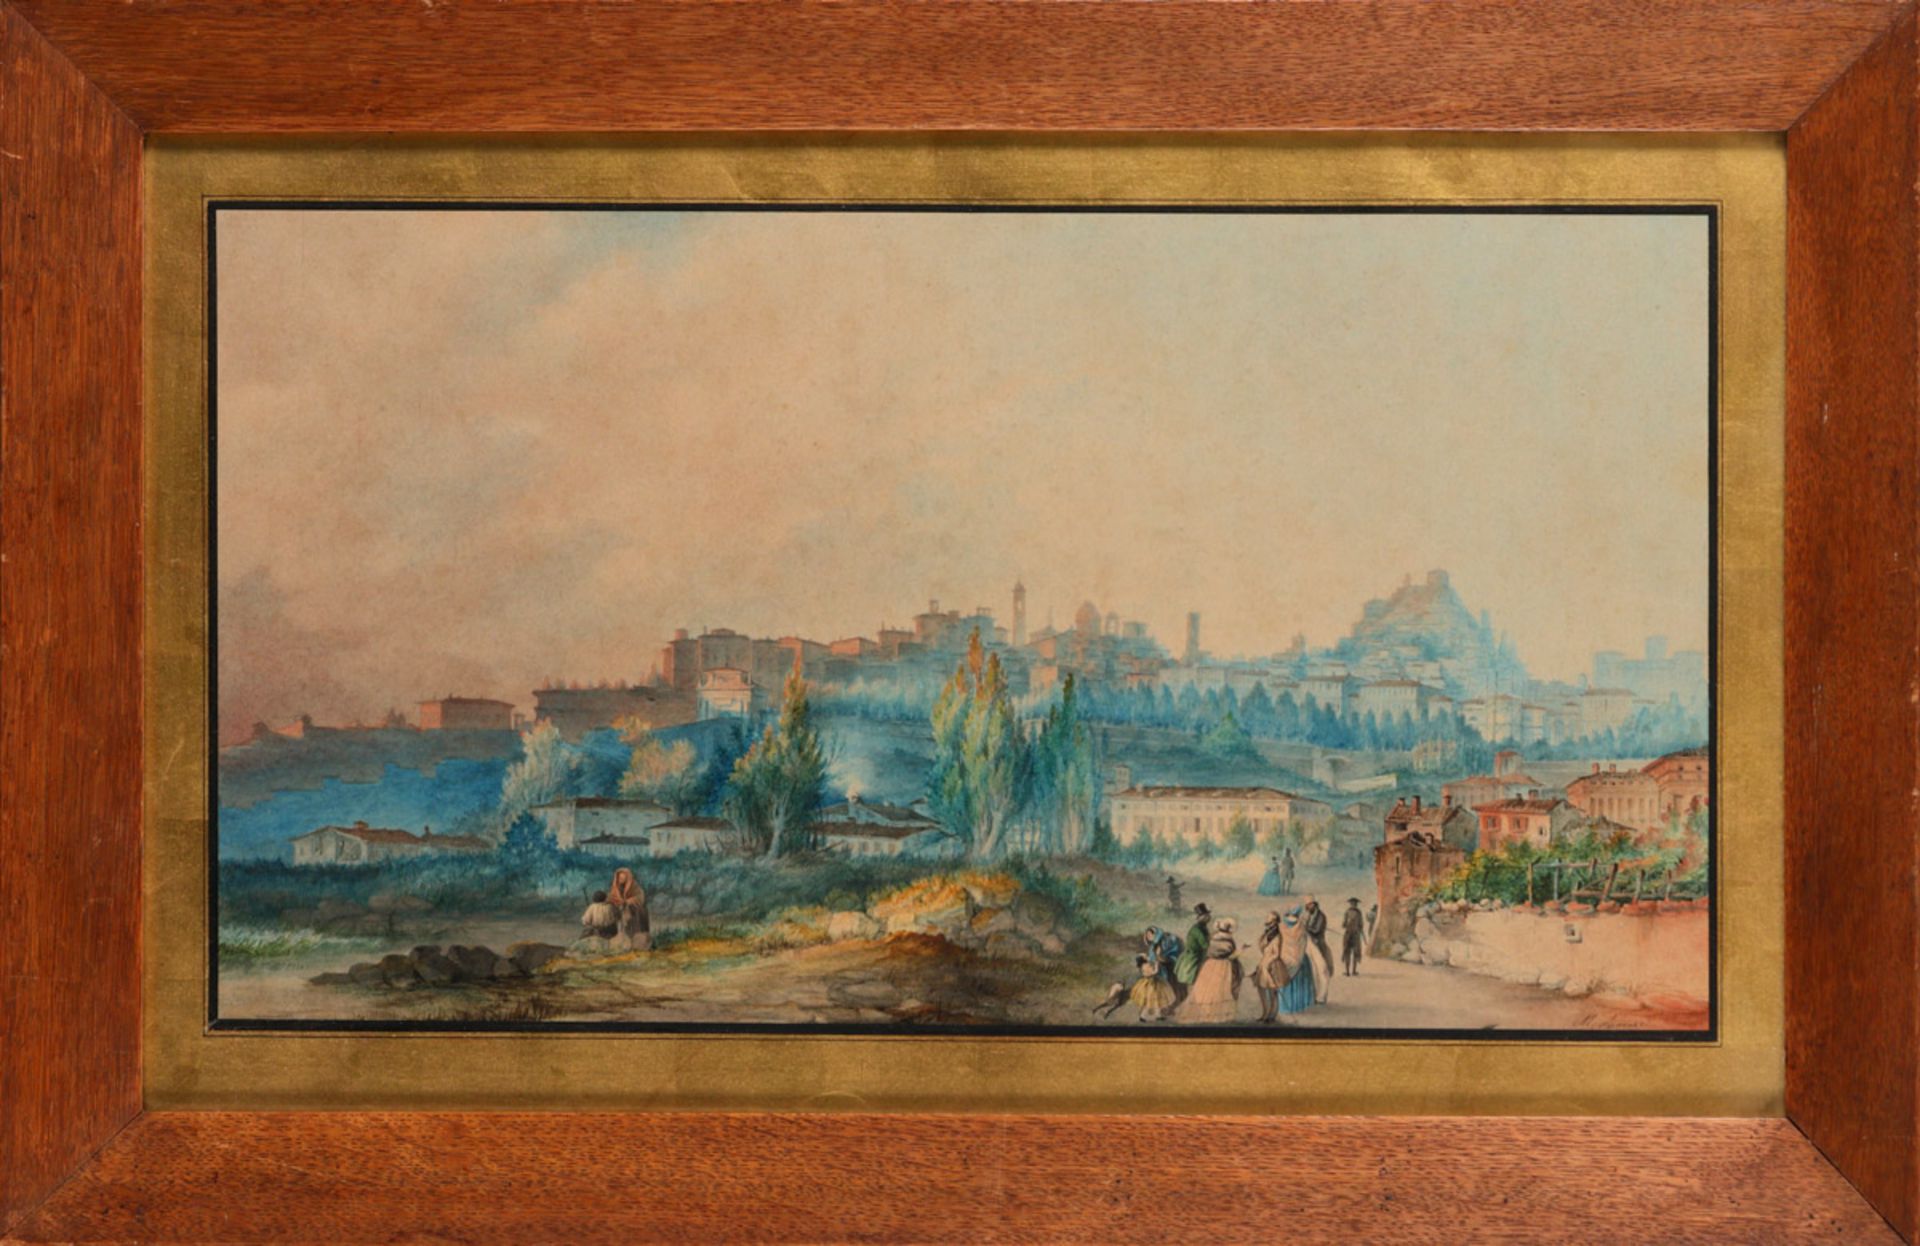 ITALIAN SCHOOL (19TH CENTURY), VIEW OF AN ITALIAN TOWN WITH FIGURES Watercolor on paper. Early